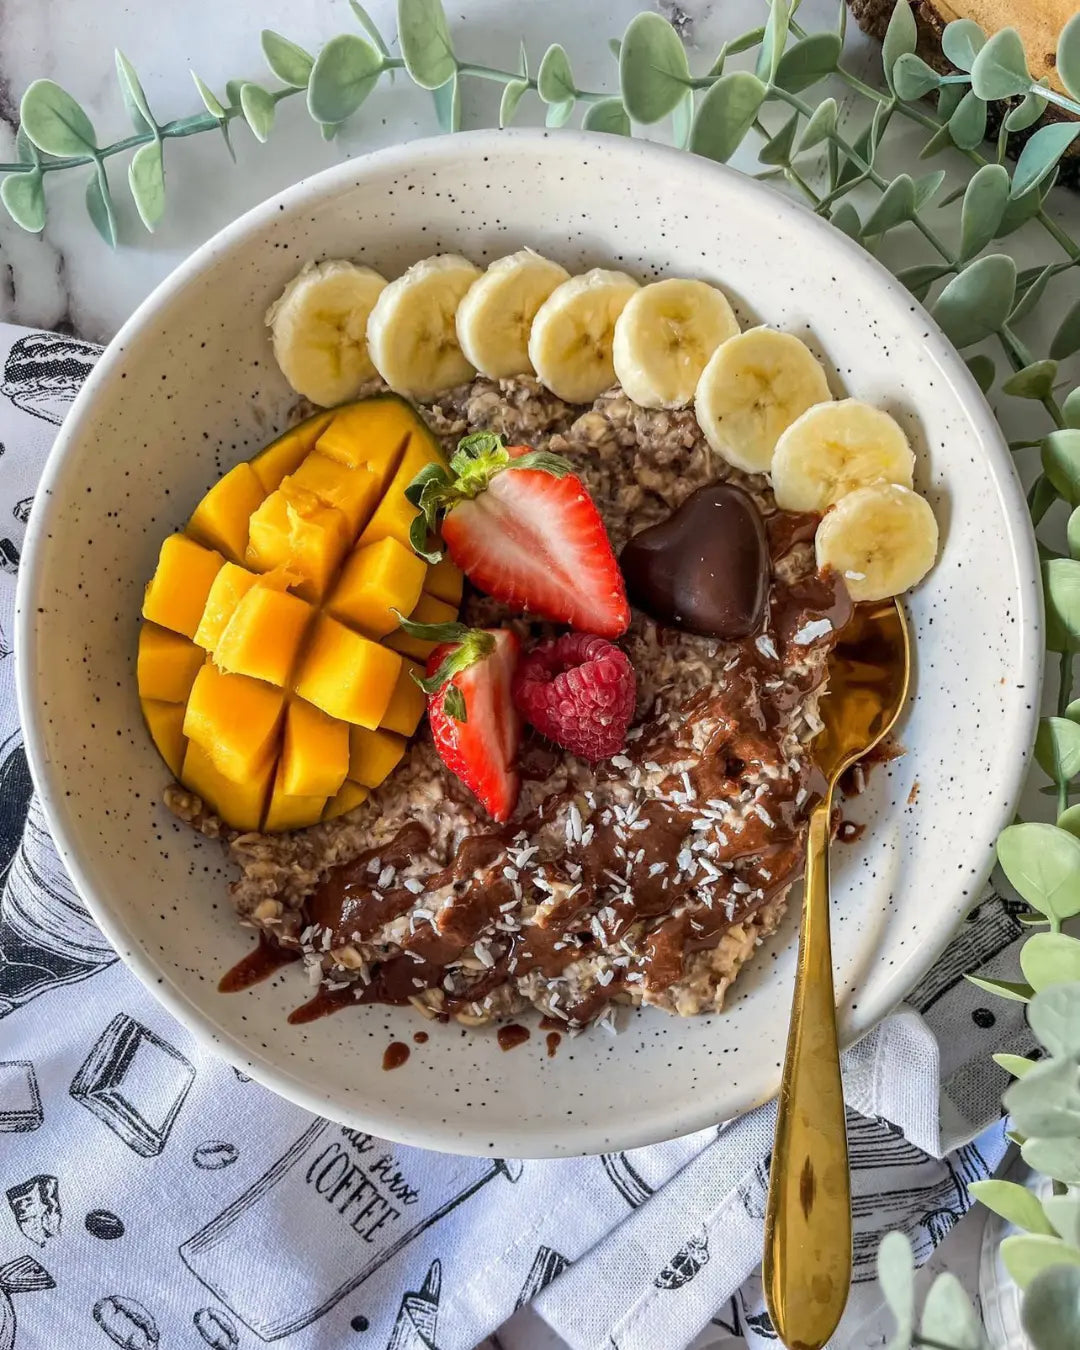 A bowl of chocolate oatmeal with mango, banana, and strawberry toppings.